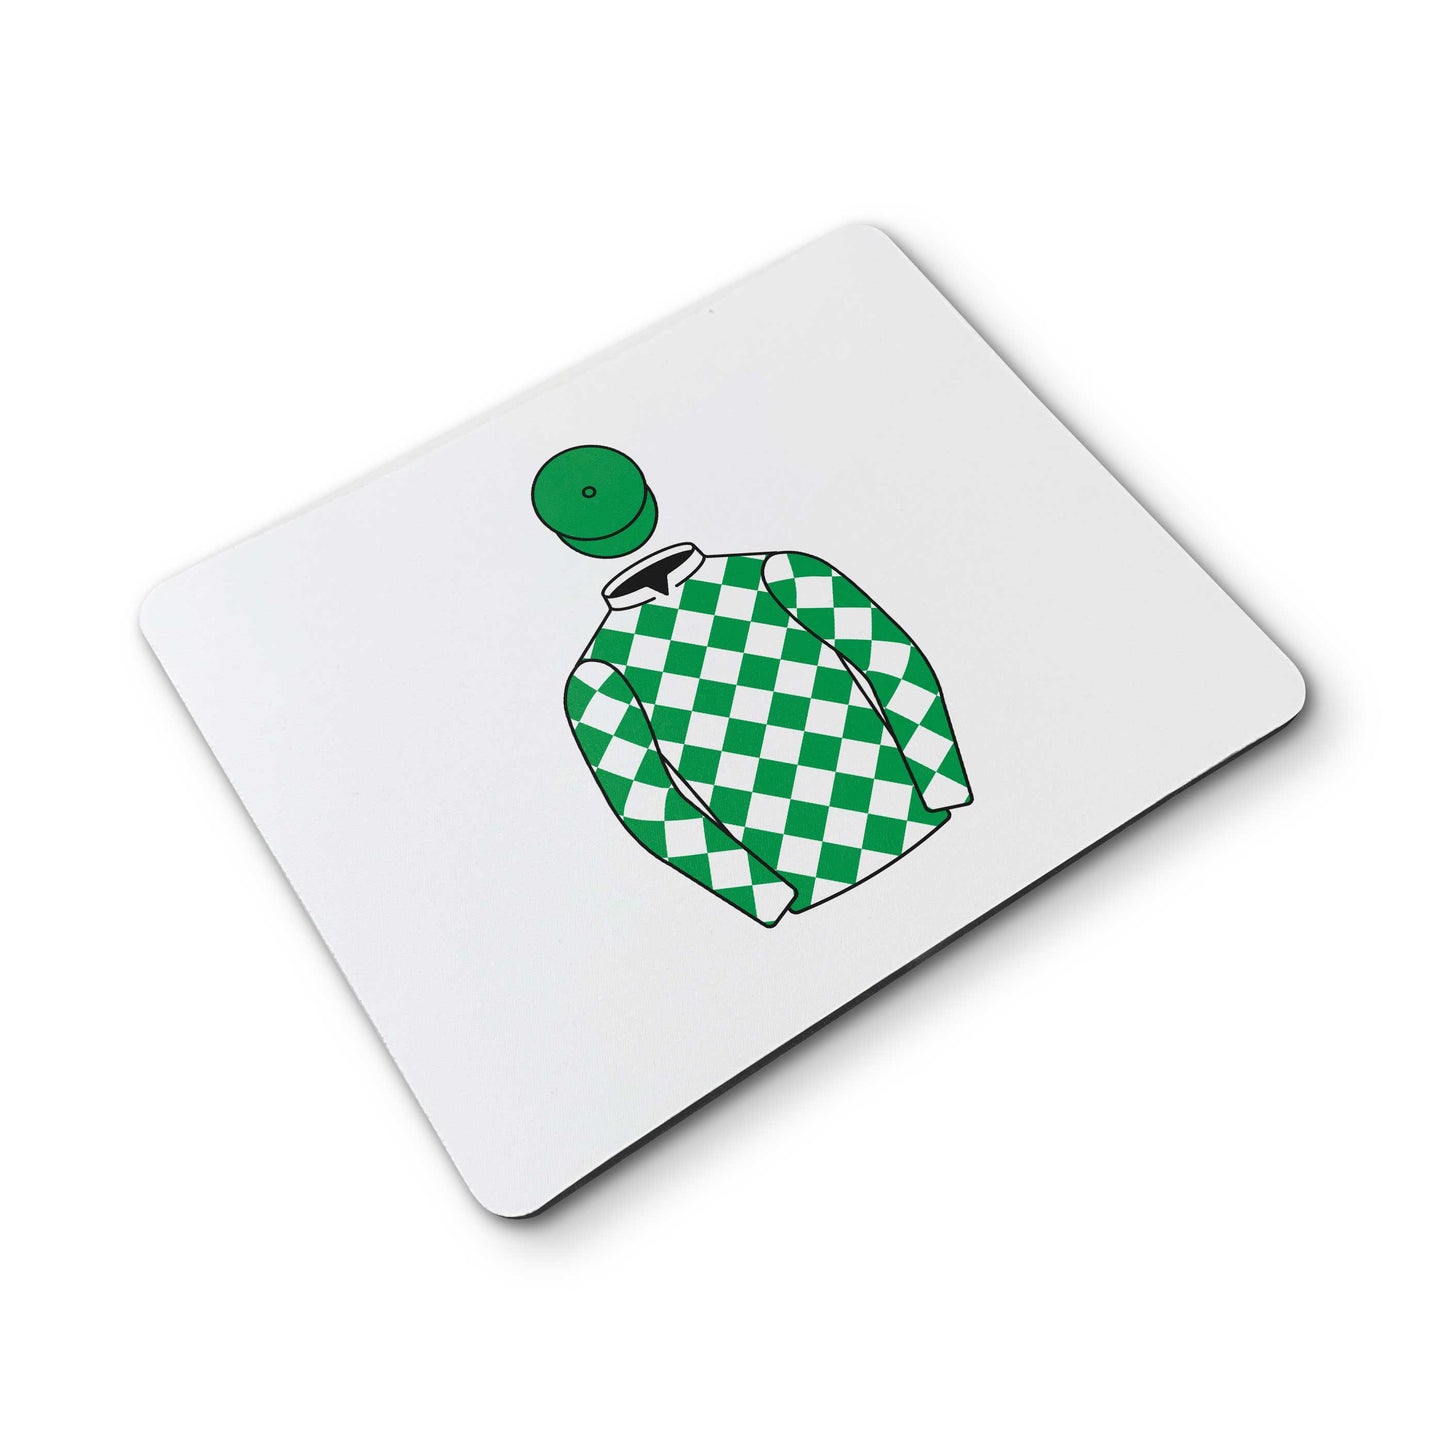 T F P Partnership Mouse Mat - Mouse Mat - Hacked Up